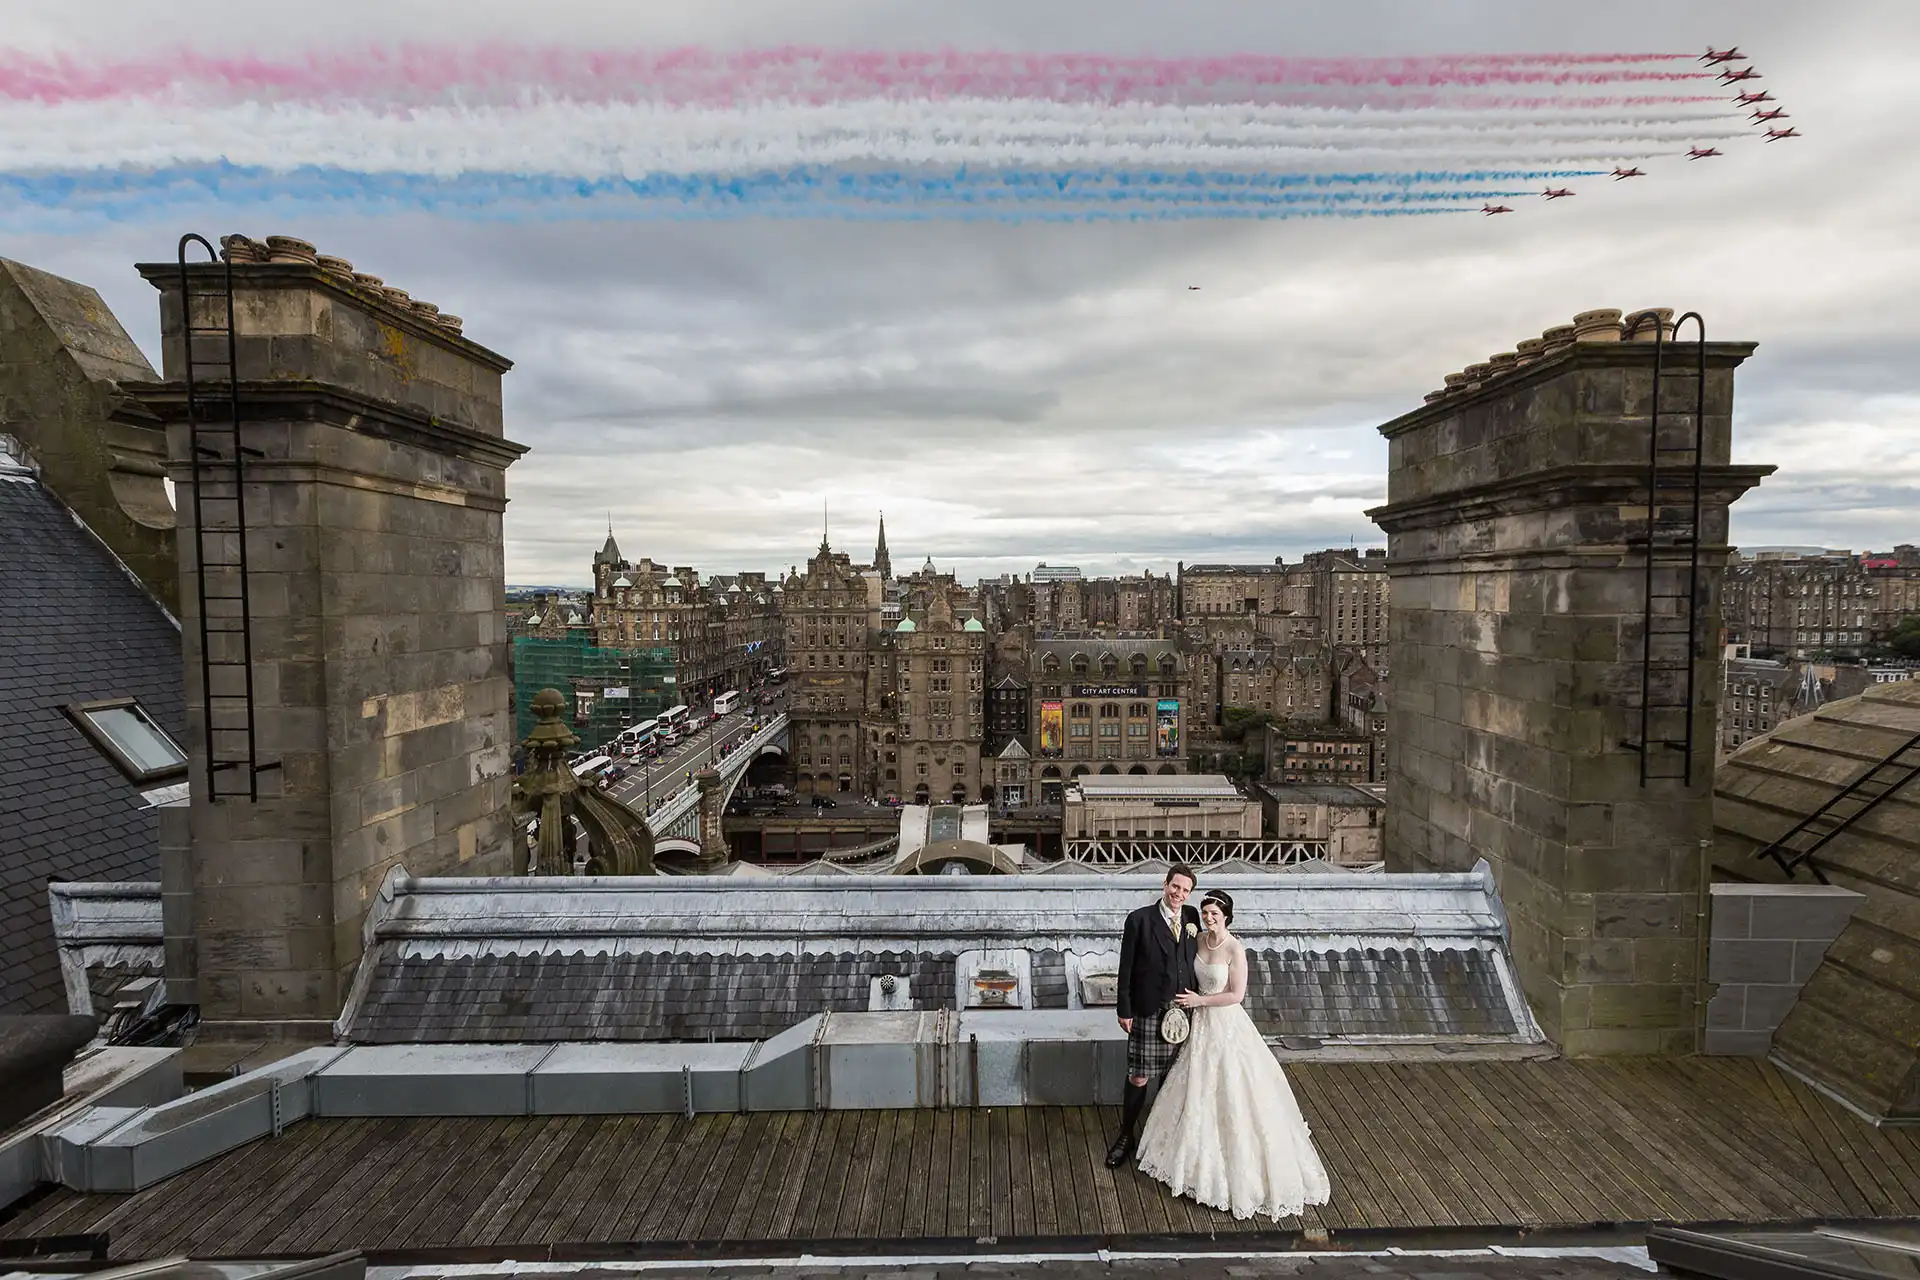 Wedding Photo Of The Year taken on the roof of the Balmoral Hotel